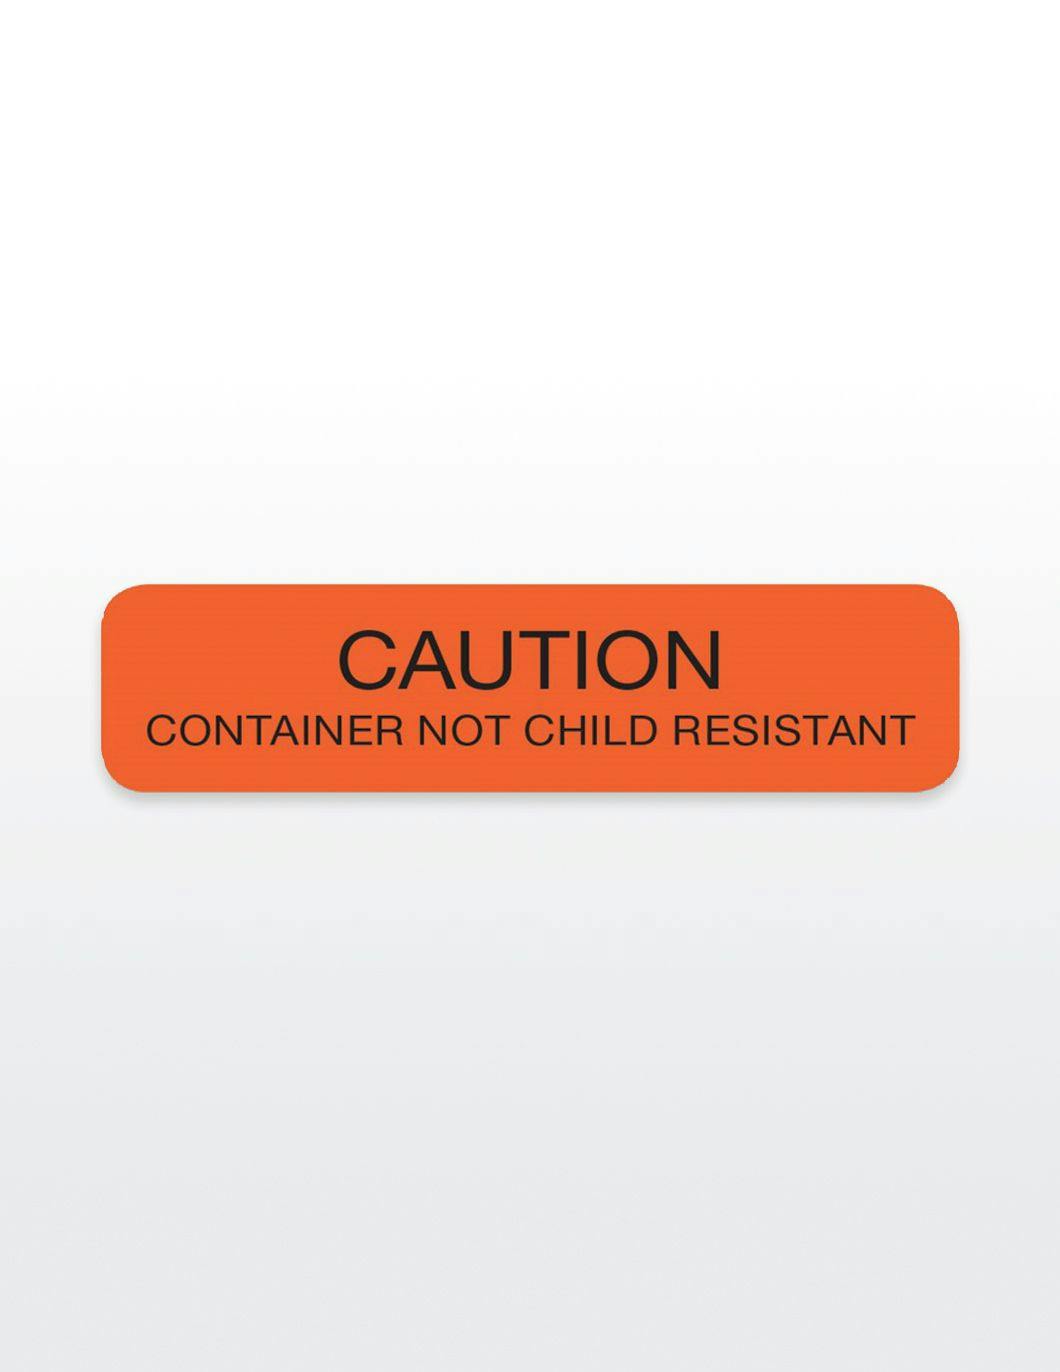 caution-container-not-child-resistant-med-stickers